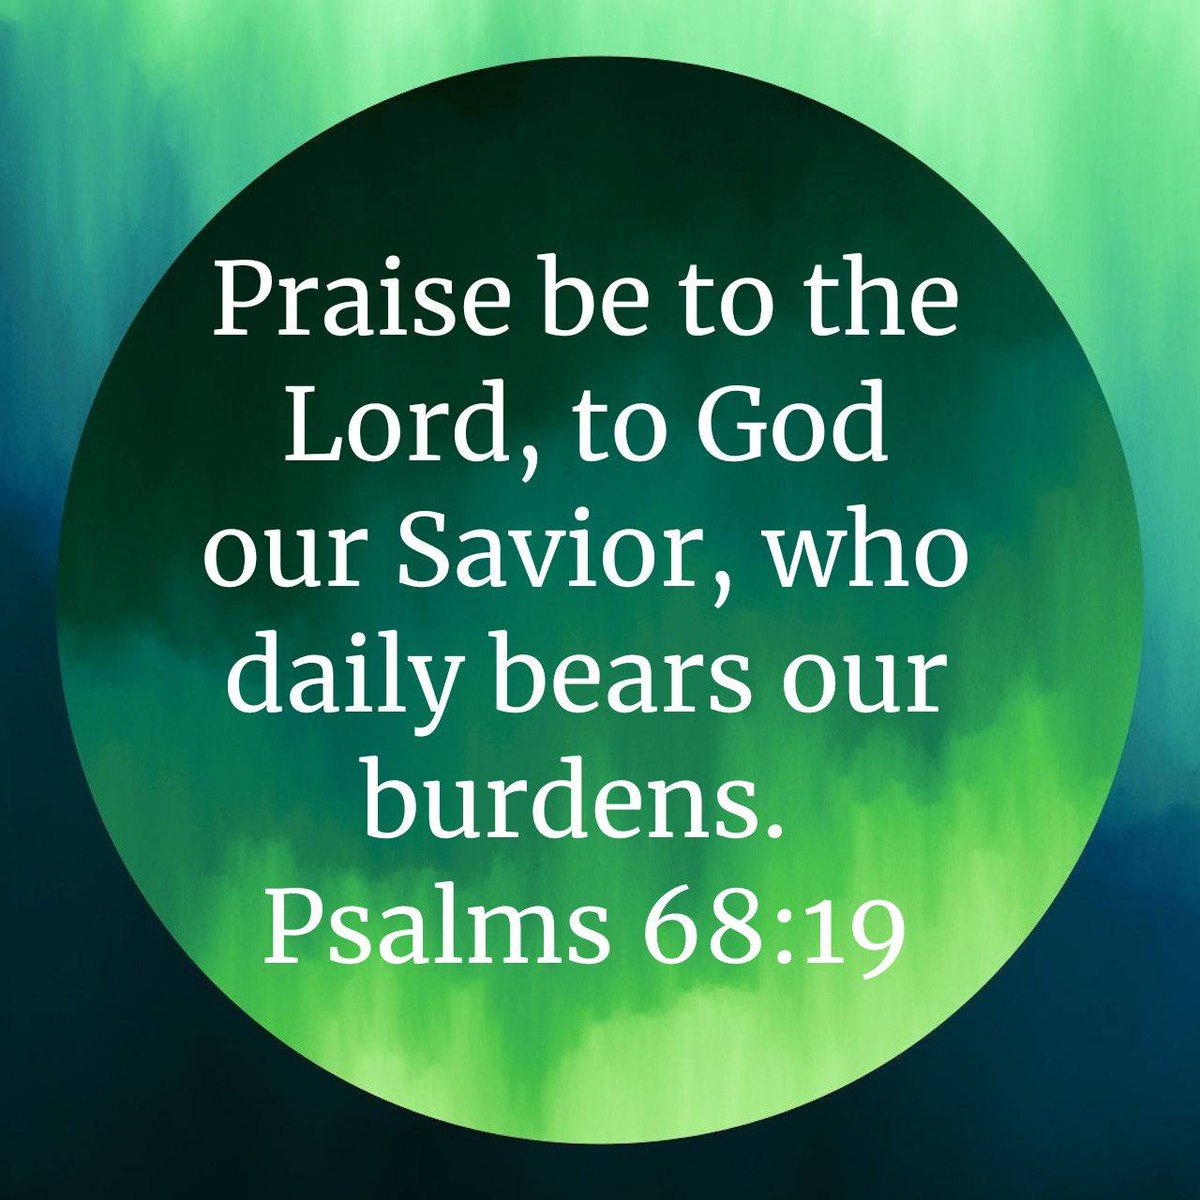 Psalms 68:19 NIV [19] Praise be to the Lord, to God our Savior, who daily bears our burdens. bible.com/bible/111/psa.…